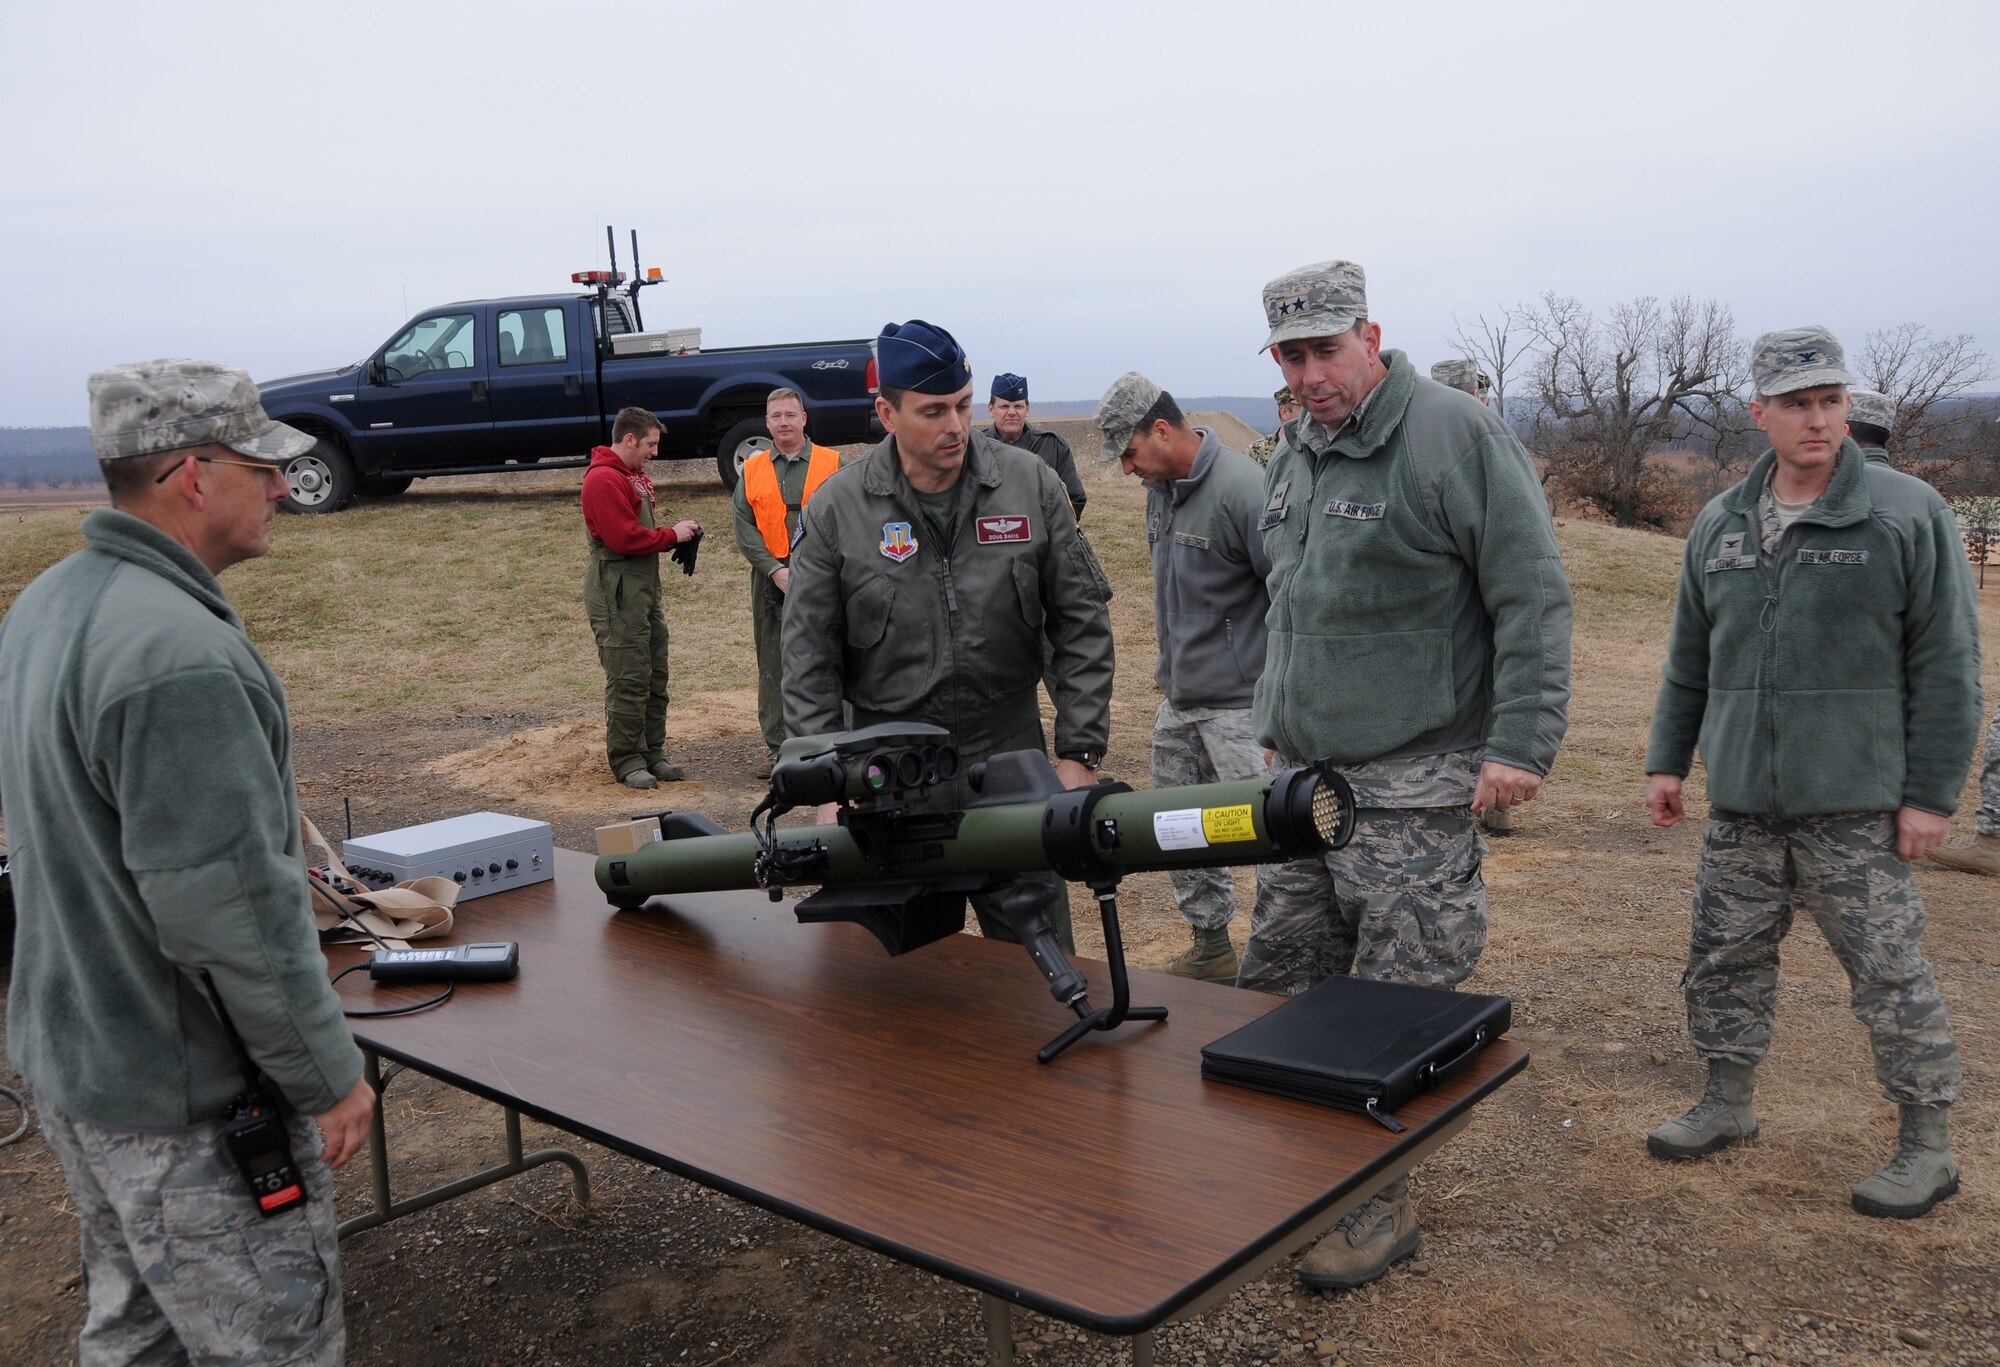 Maj. Doug Davis, 188th Wing Detachment 1 Razorback Range commander, shows Maj. Gen. John Shanahan, commander of the 25th Air Force, the man-portable aircraft survivability trainer at Ebbing Air National Guard Base, Fort Smith, Ark., Dec. 11, 2014. The MAST is a live-training device used to train aircrews to react to surface-to-air missile threats during live-training exercises. Shanahan’s visit encompassed seeing and understanding how the wing’s new mission aligns with the 25th AF. (U.S. Air National Guard photo by Airman 1st Class Cody Martin/released)